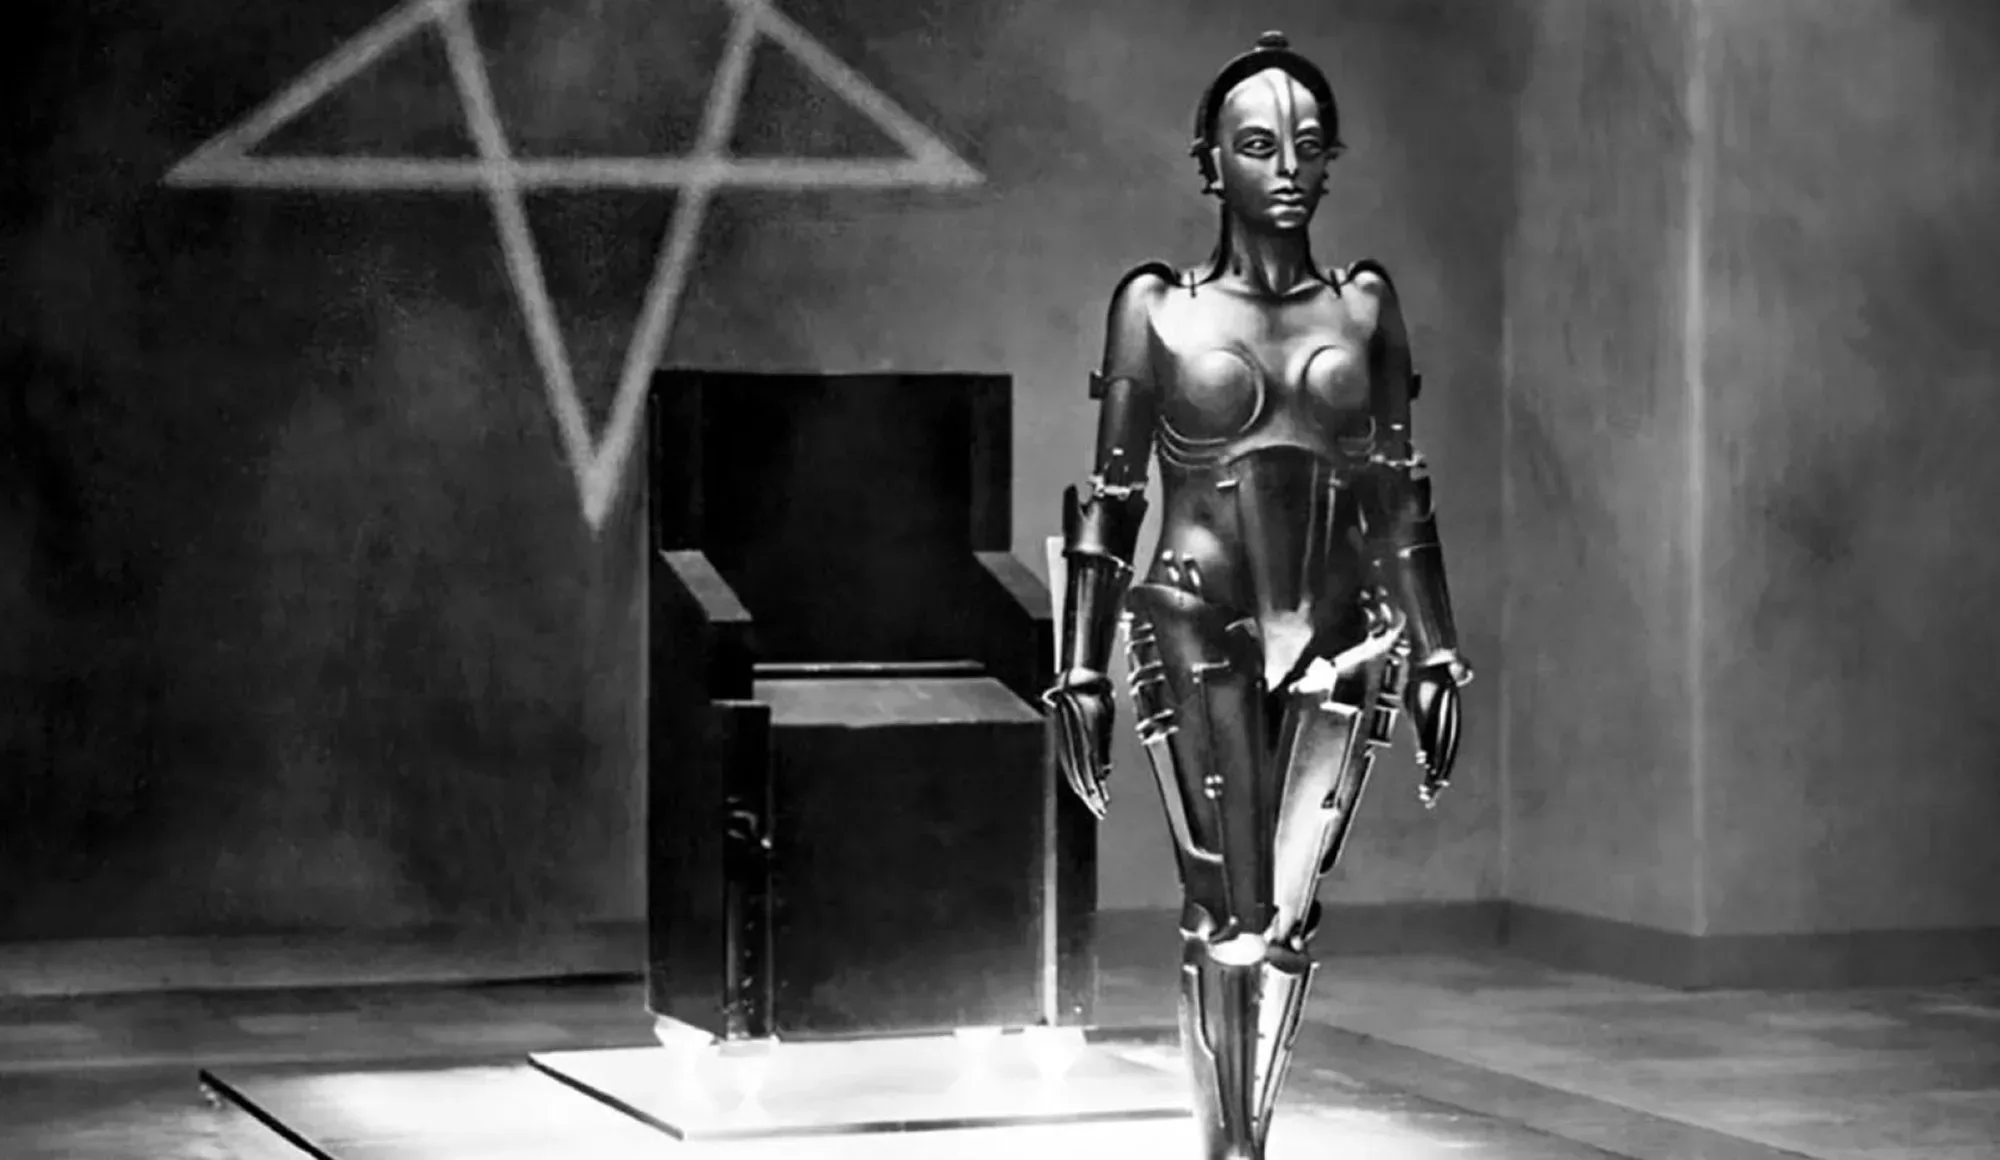 A still shot from the film Metropolis. The robot created by the evil scientist, Rotwang stands in front of a black modular chair on a platform